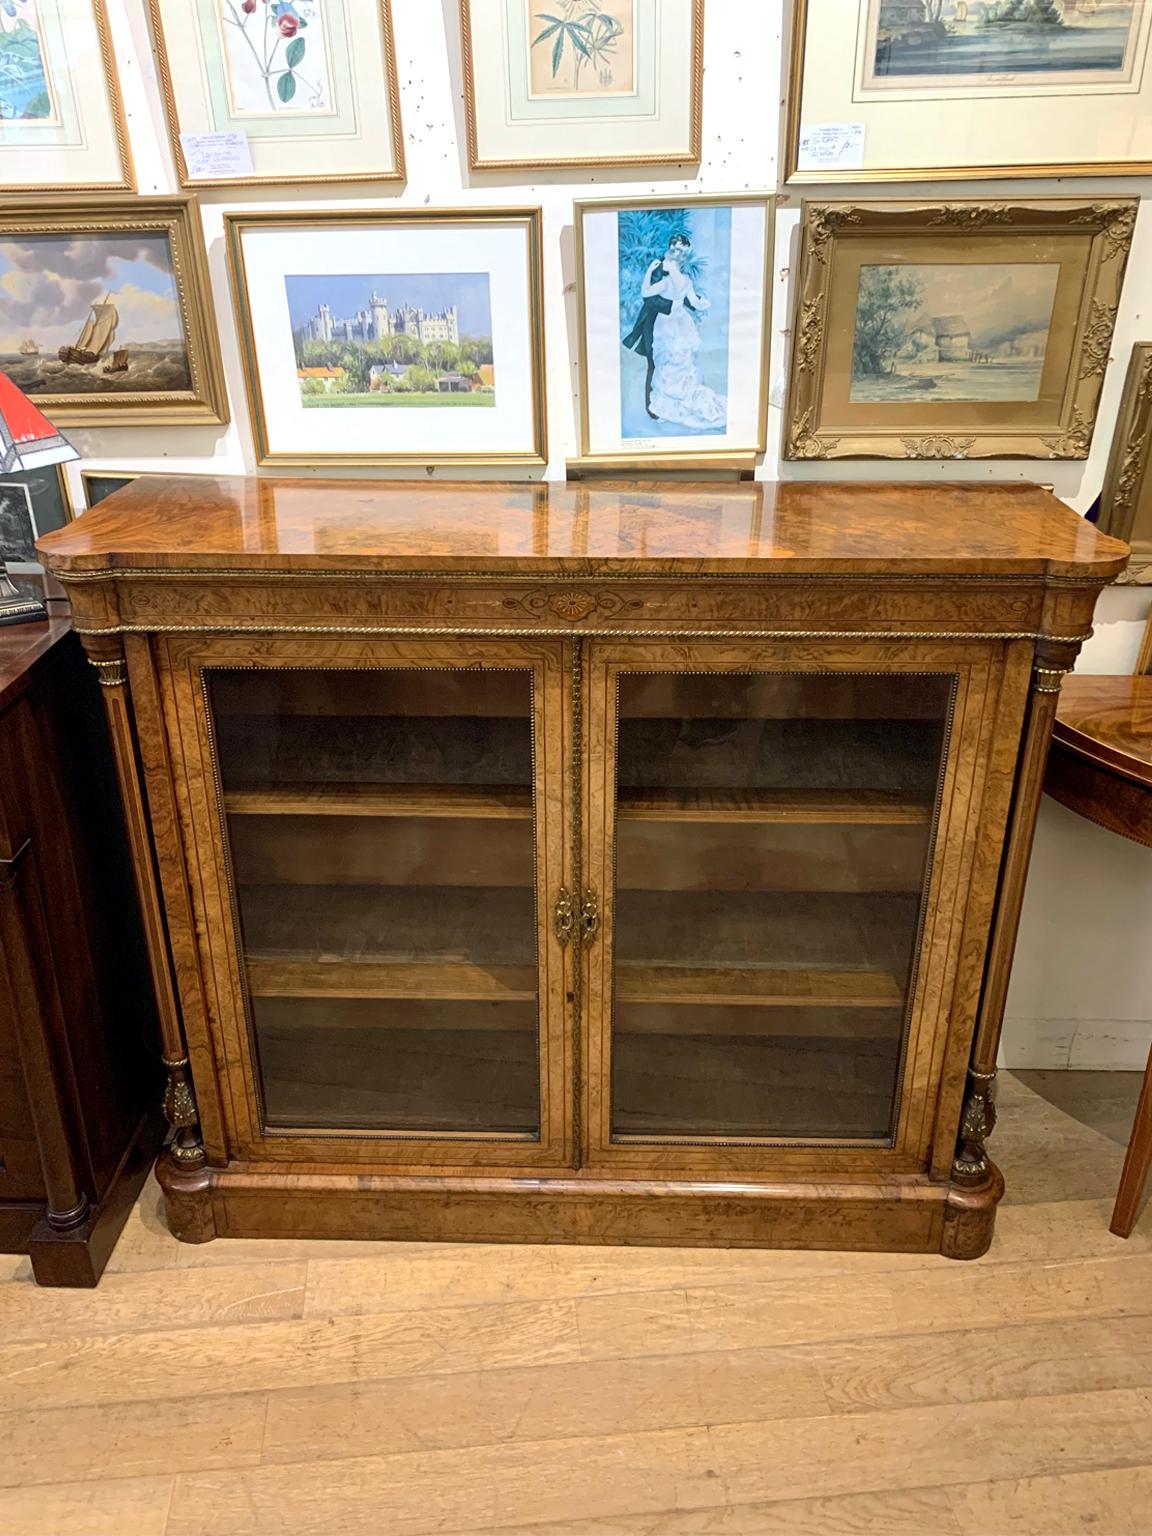 A very high quality 19th century burr walnut bookcase / cabinet with gilt metal mounts and marquetry inlaid decoration throughout, glazed doors enclosing original fitted shelves flanked by inlaid columns, on plinth base.

Circa: